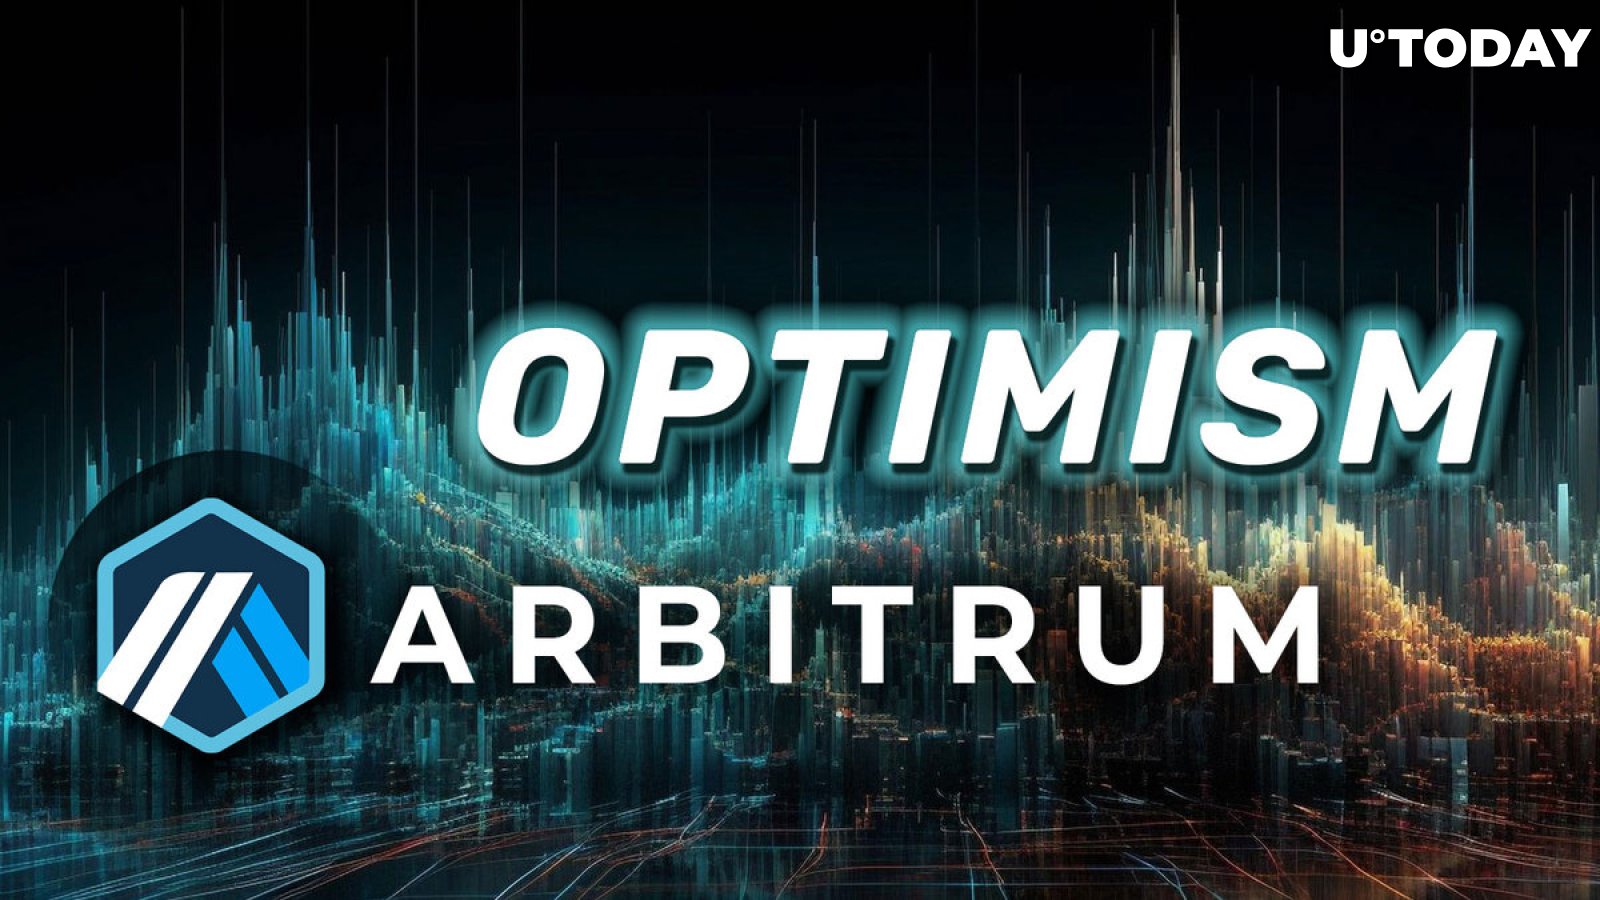 Optimism (OP) Surprisingly Flips Arbitrum (ARB) in Daily Transactions, But There Is Caveat